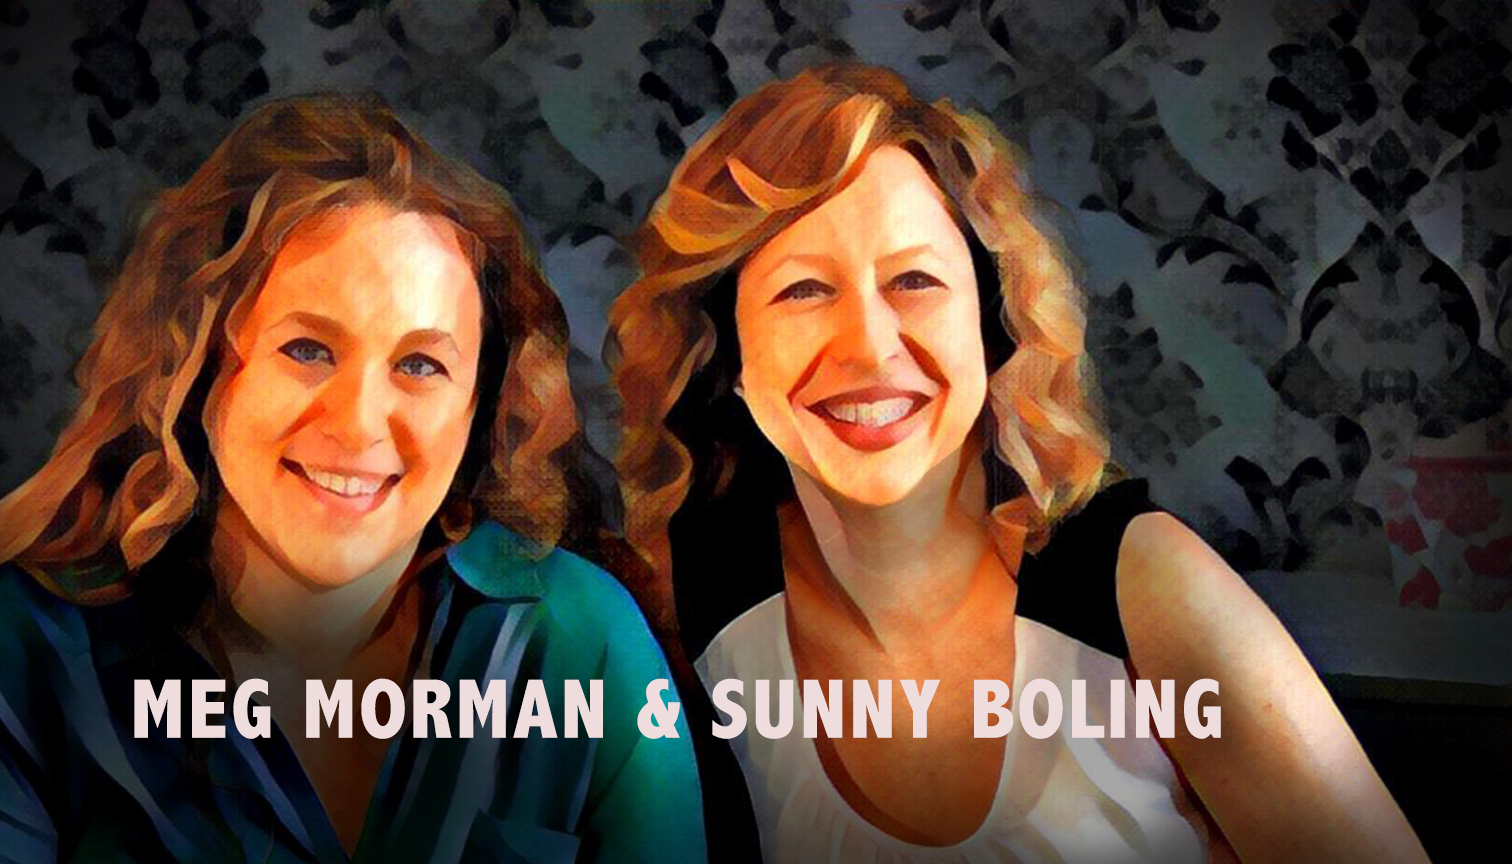 THE DOS AND DON’TS OF CASTING: Casting directors Meg Morman and Sunny Boling reveal their secrets